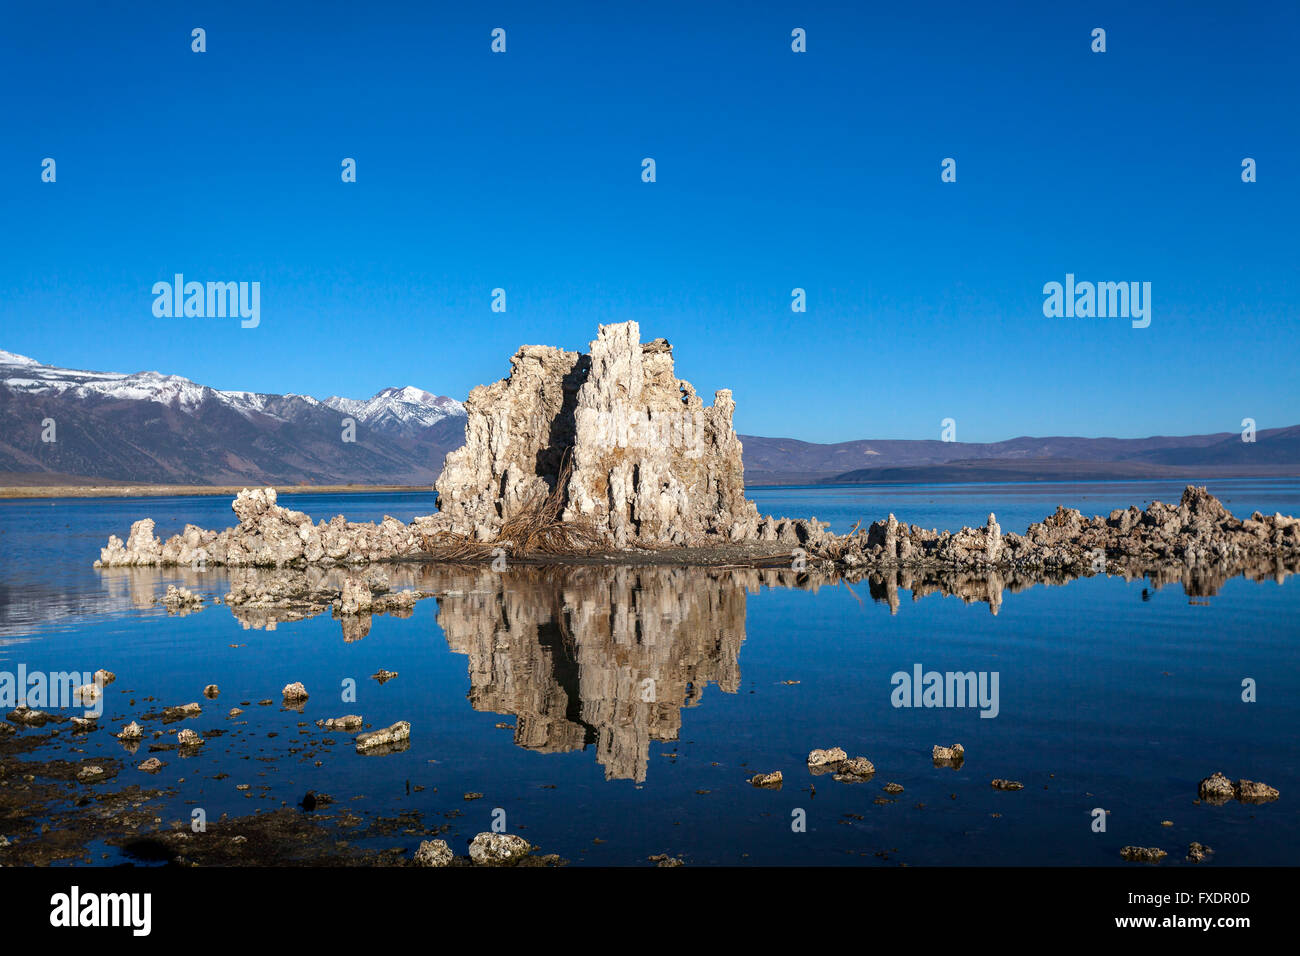 Majestic Tufa Towers emerging from the water at Mono Lake, California. Stock Photo